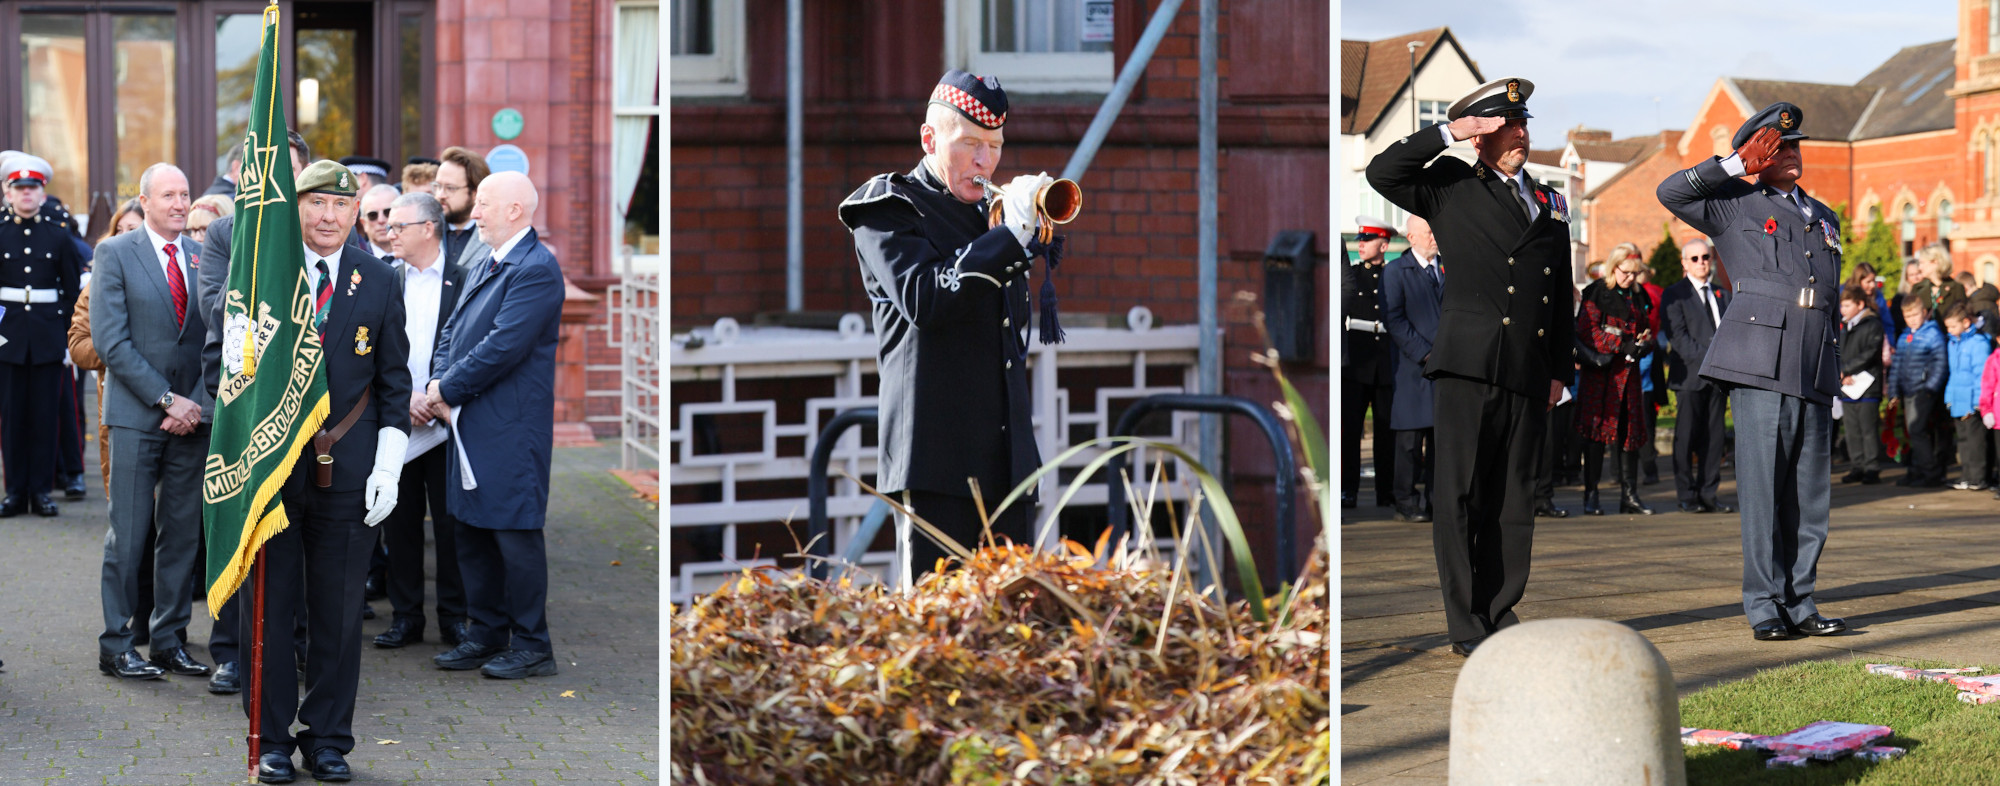 Veterans, members of the armed forces, and civic dignitaries at the laying of the first poppy